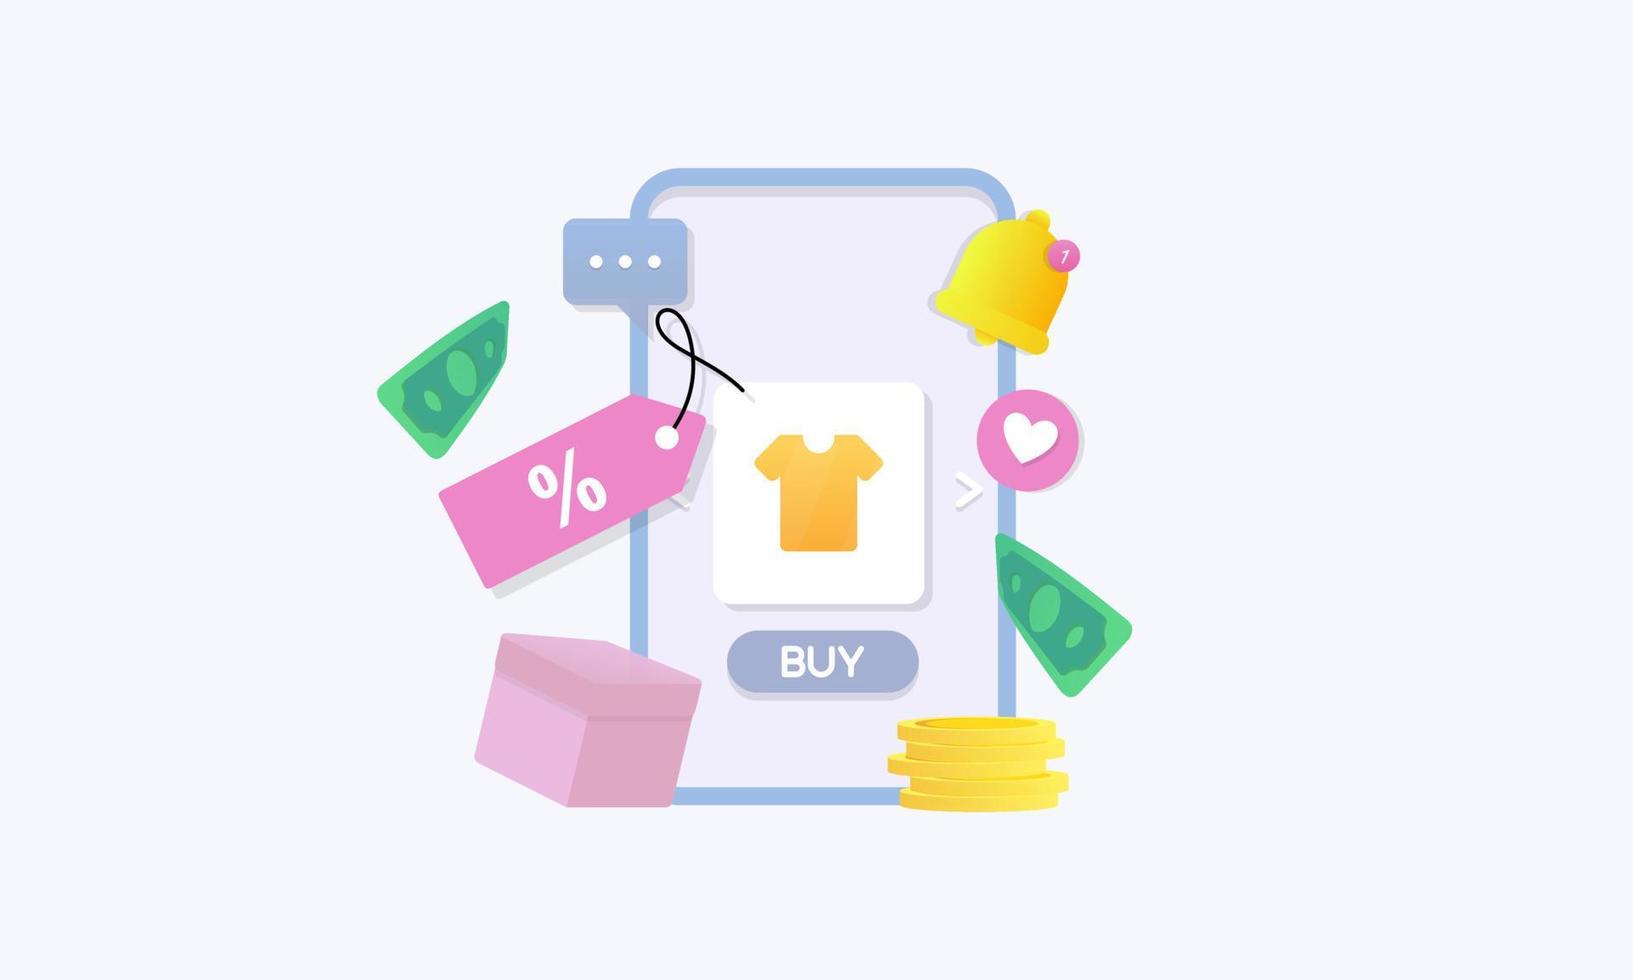 Online shopping 3d illustration, online shop, online payment and delivery concept with floating elements vector